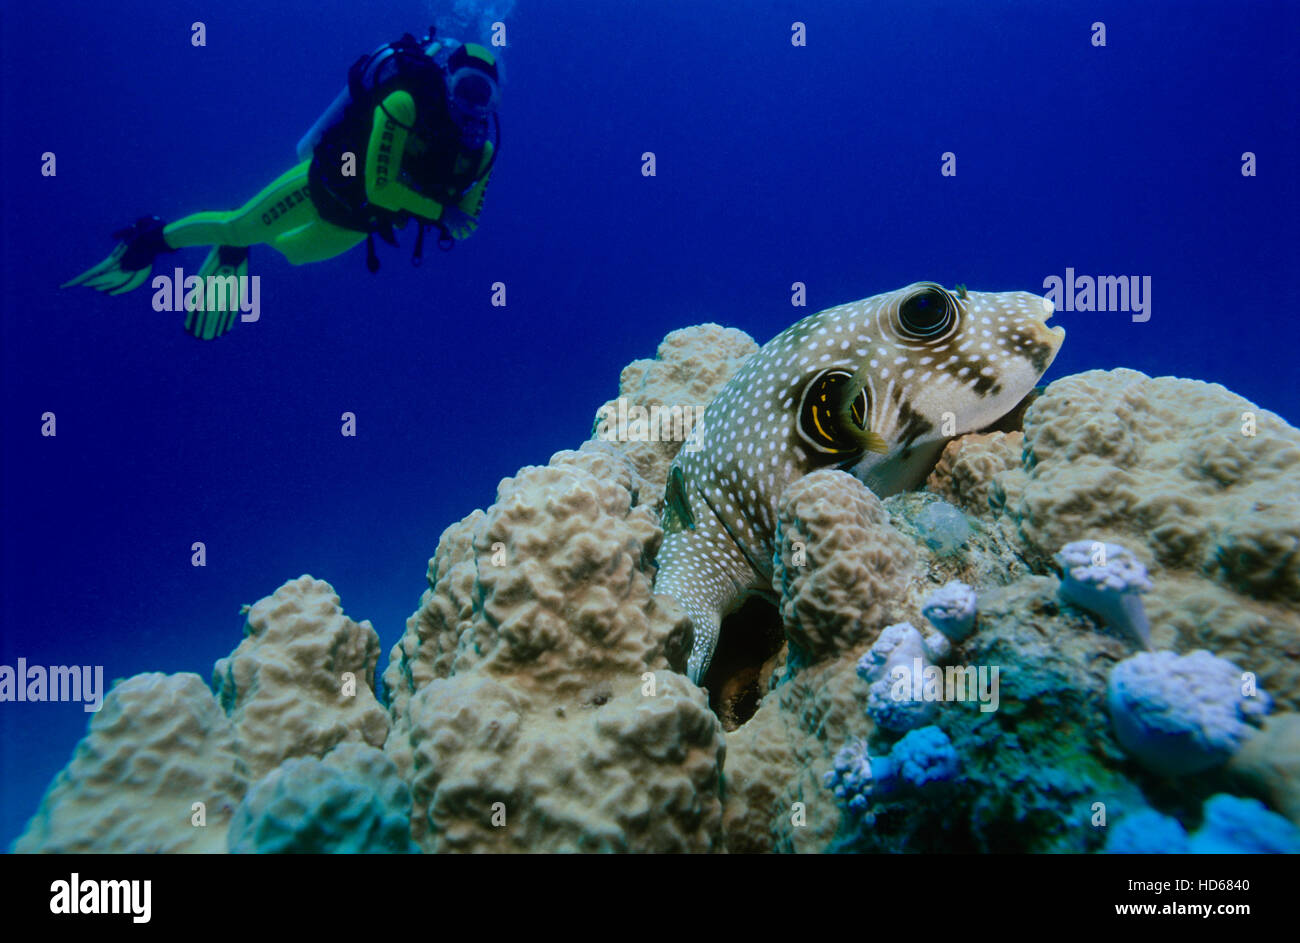 Scuba diver observing a White-spotted Puffer fish (Arothron hispidus) on a coral, Red Sea, Egypt, Africa Stock Photo